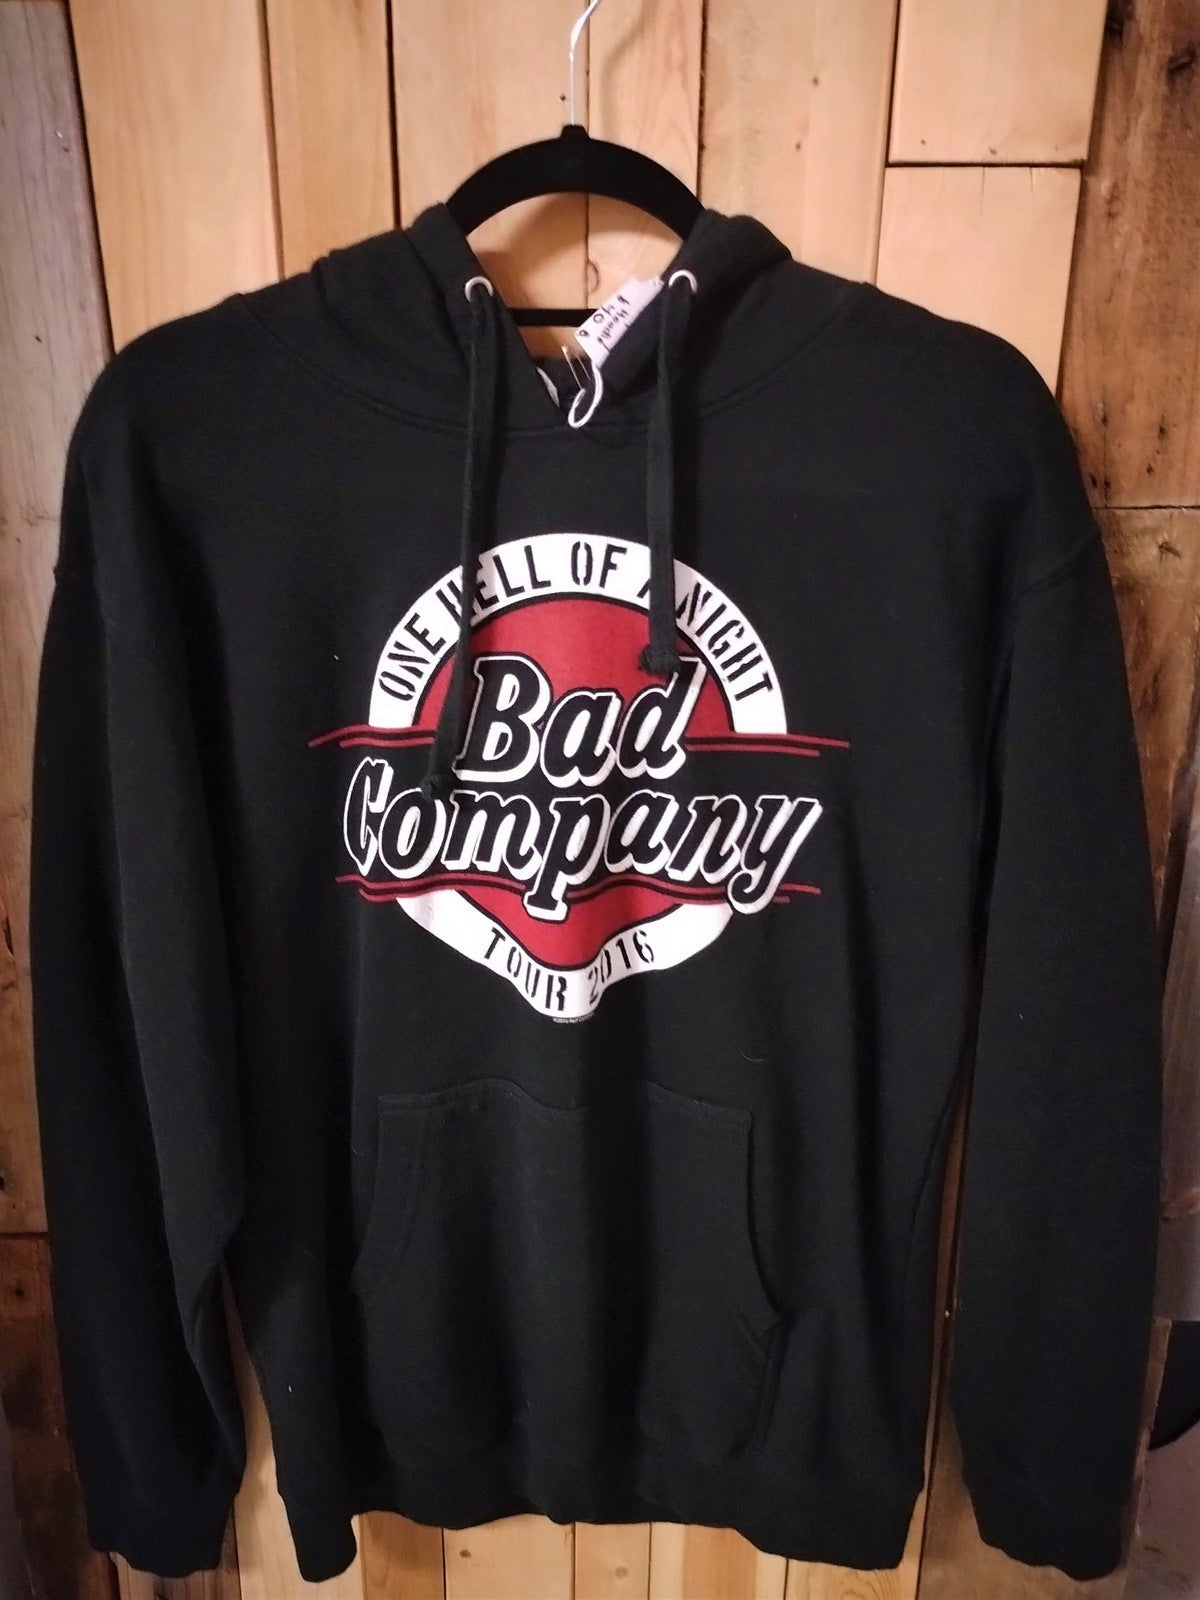 Bad Company "One Hell Of A Night" 206 Tour Hoodie Size Medium